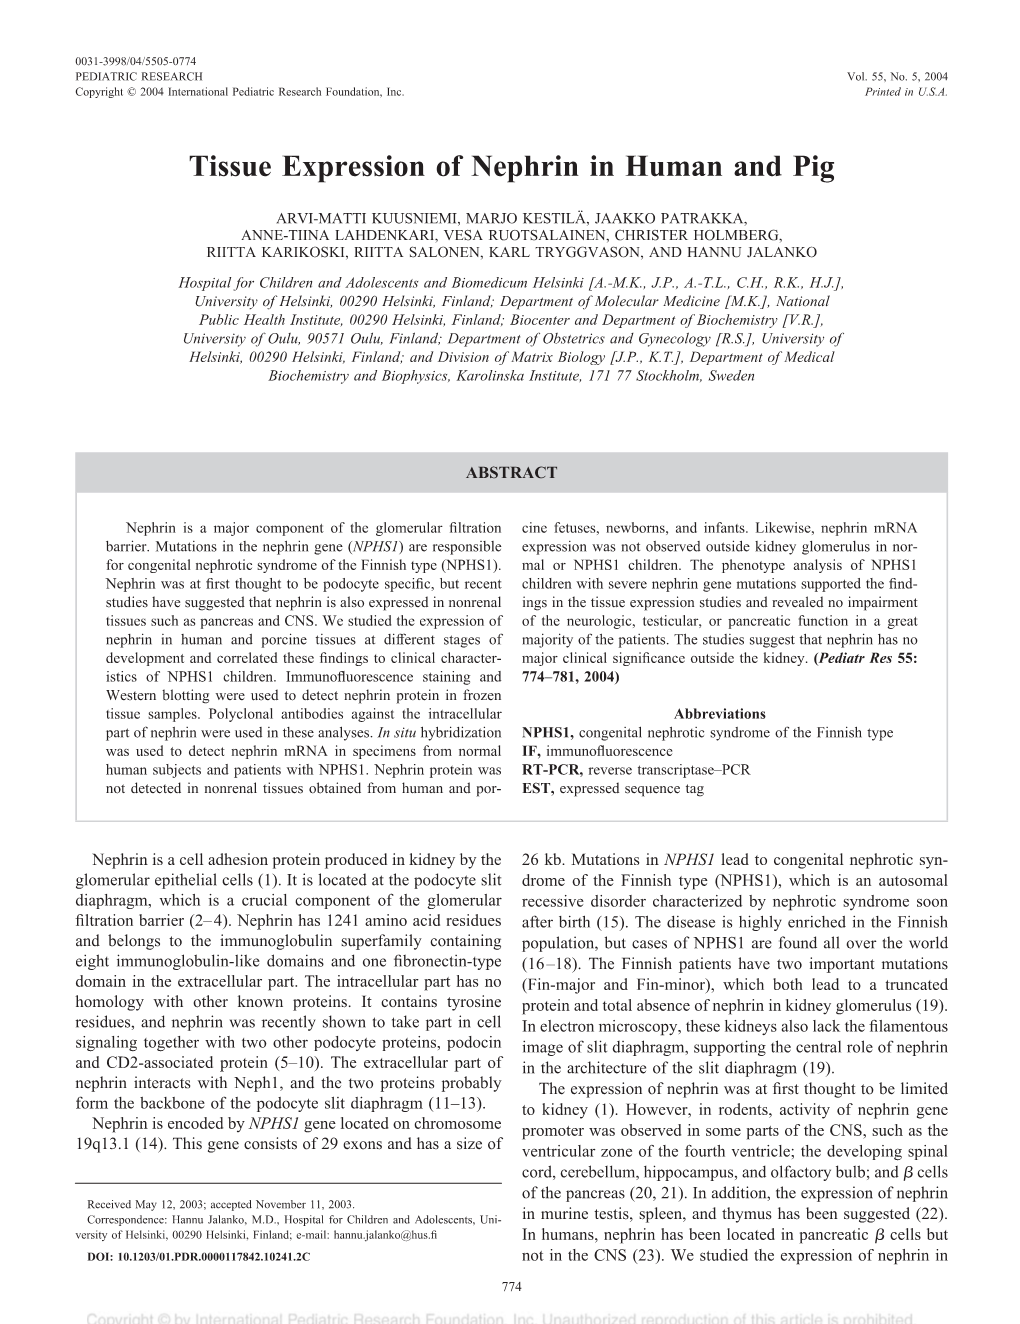 Tissue Expression of Nephrin in Human and Pig